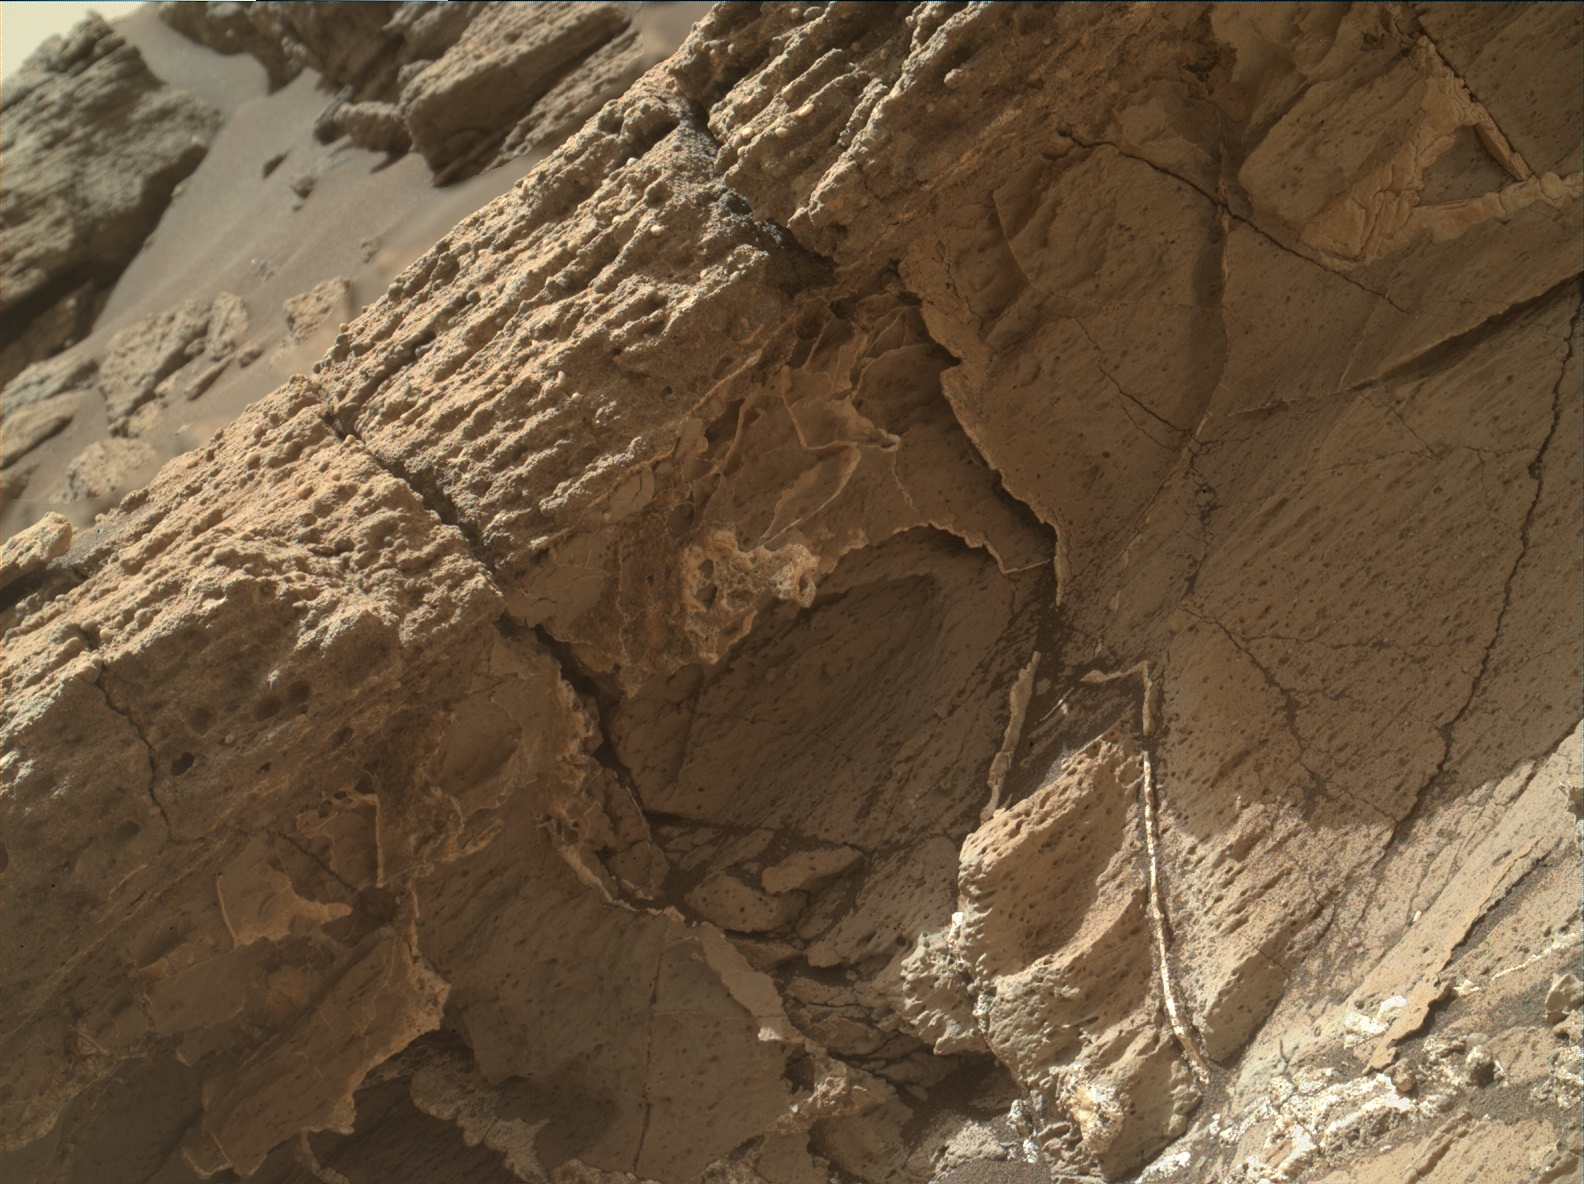 Nasa's Mars rover Curiosity acquired this image using its Mars Hand Lens Imager (MAHLI) on Sol 1031